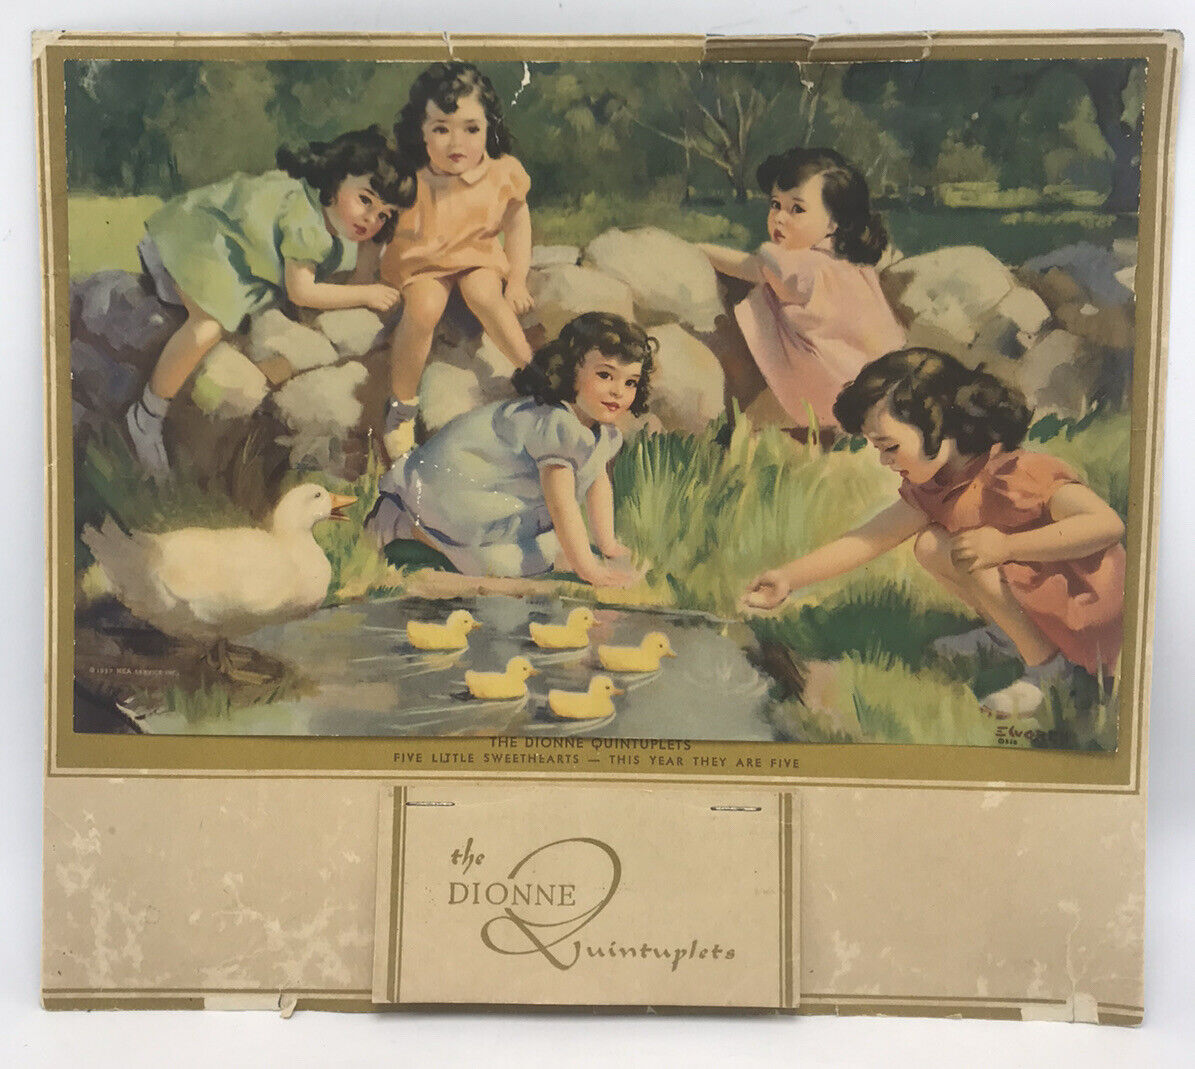 Vtg 1939 Dionne Quintuplets Wall Calendar - The Quintuplets at Five Years Old